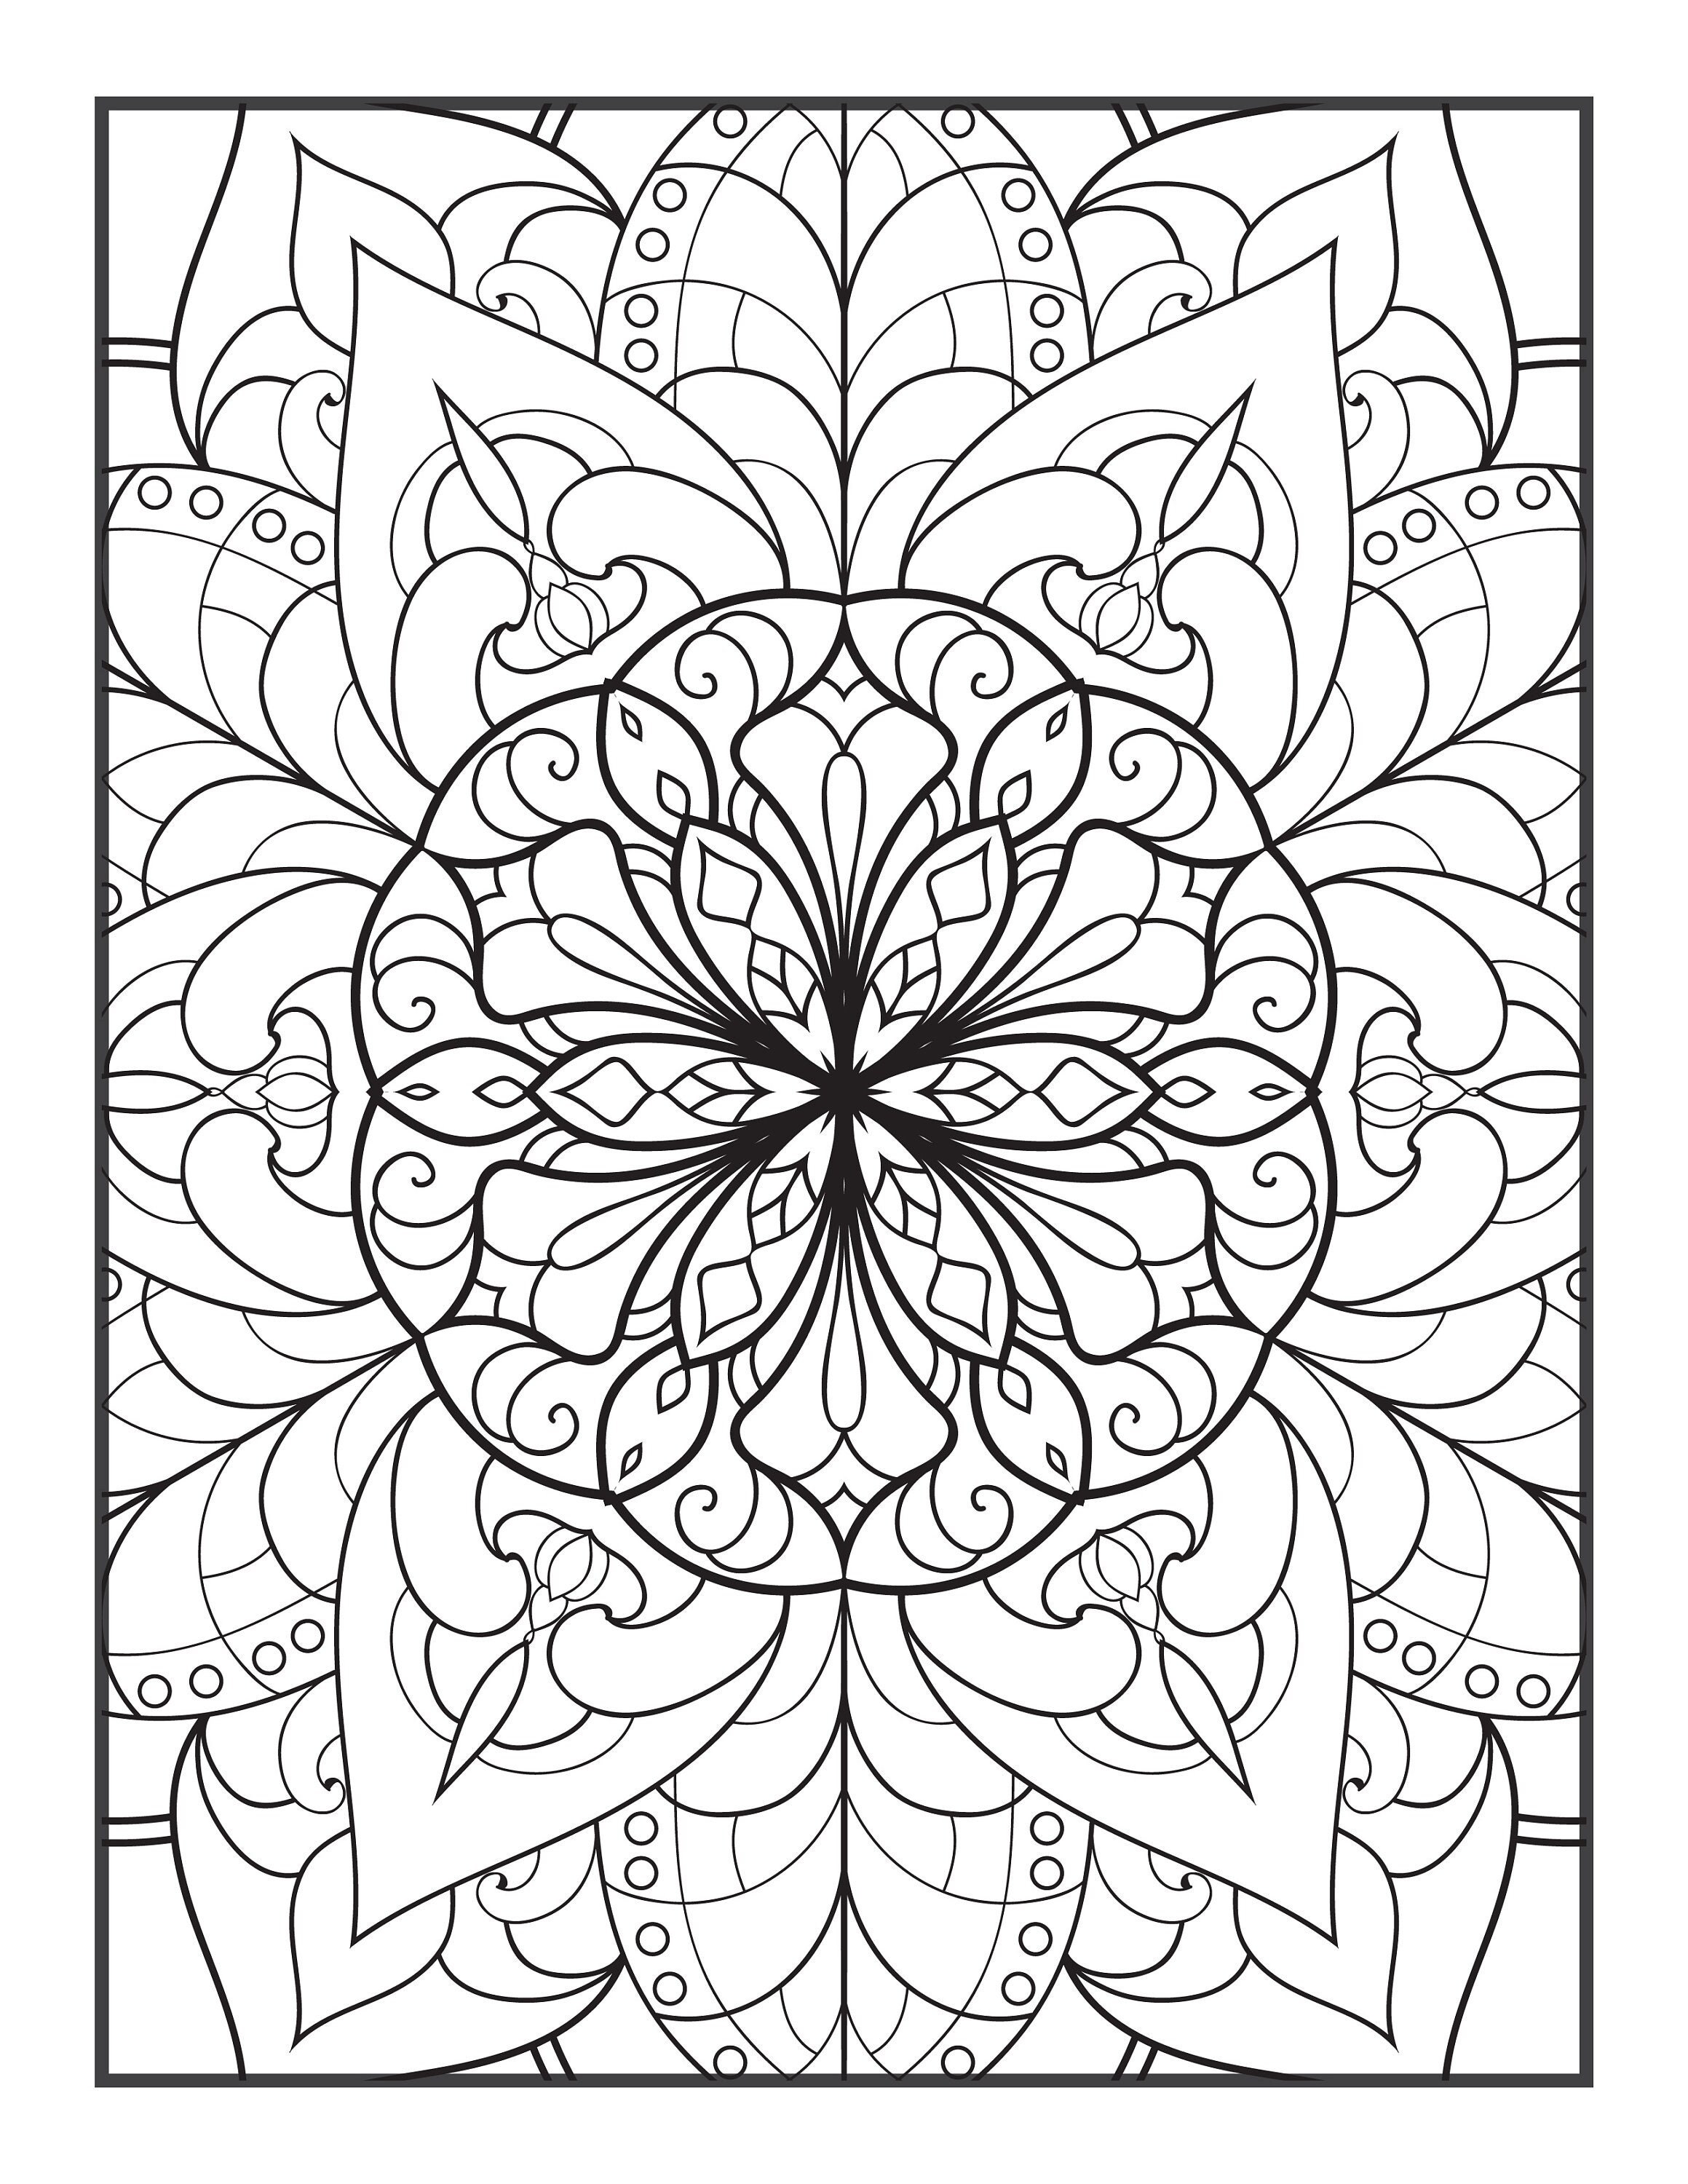 Printable coloring pages for teens and adults digital download